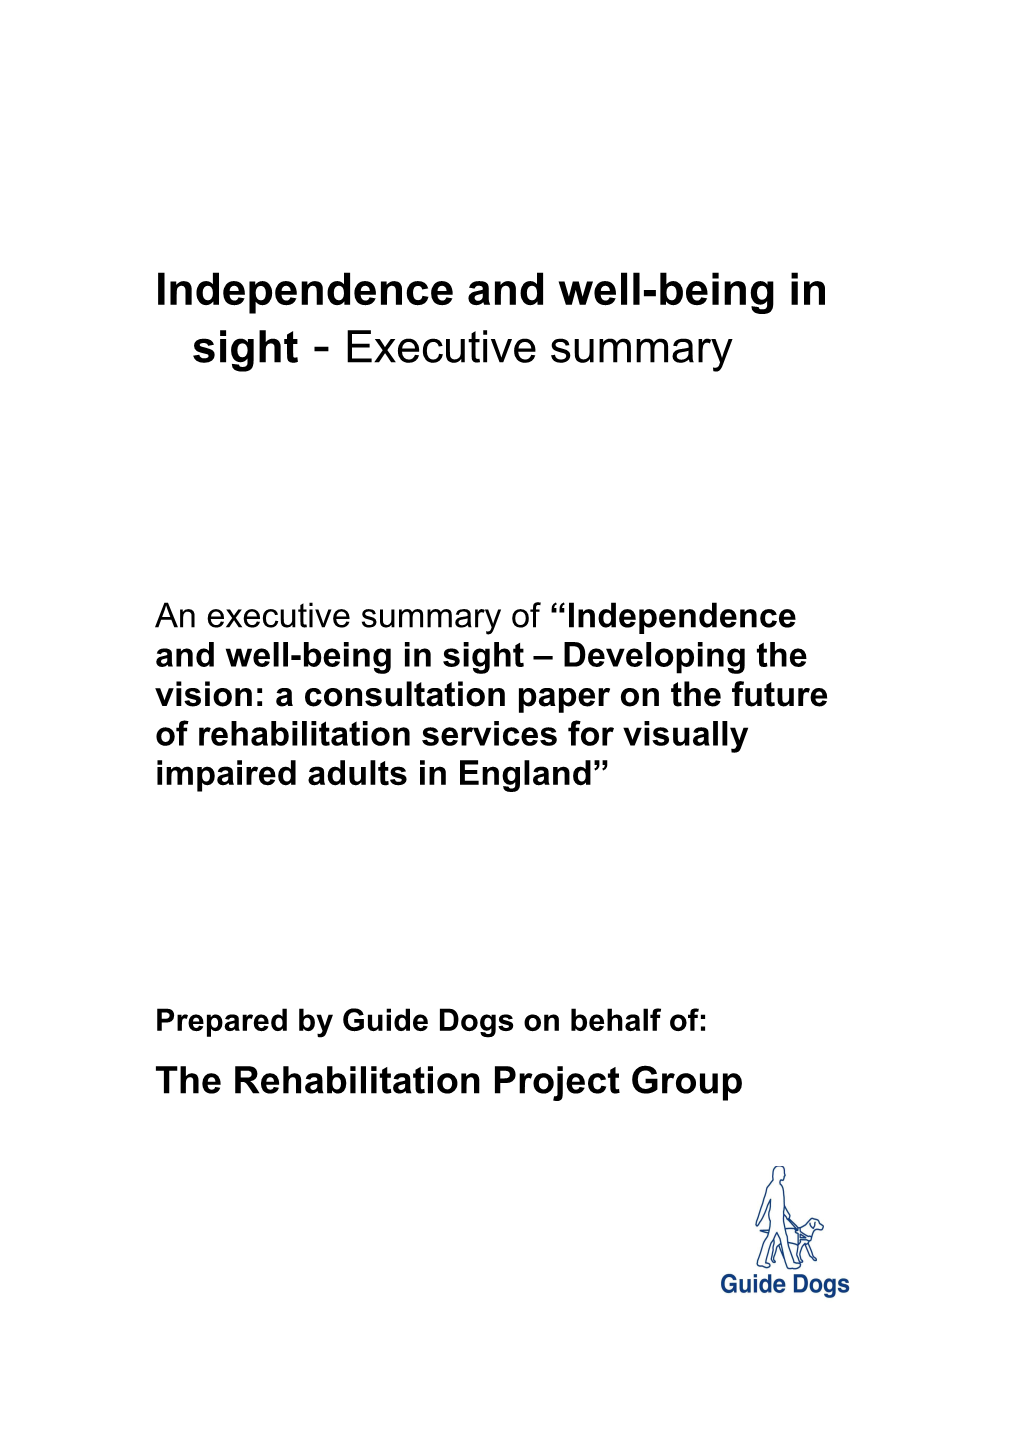 Independence, Choice and Wellbeing in Sight Developing the Vision